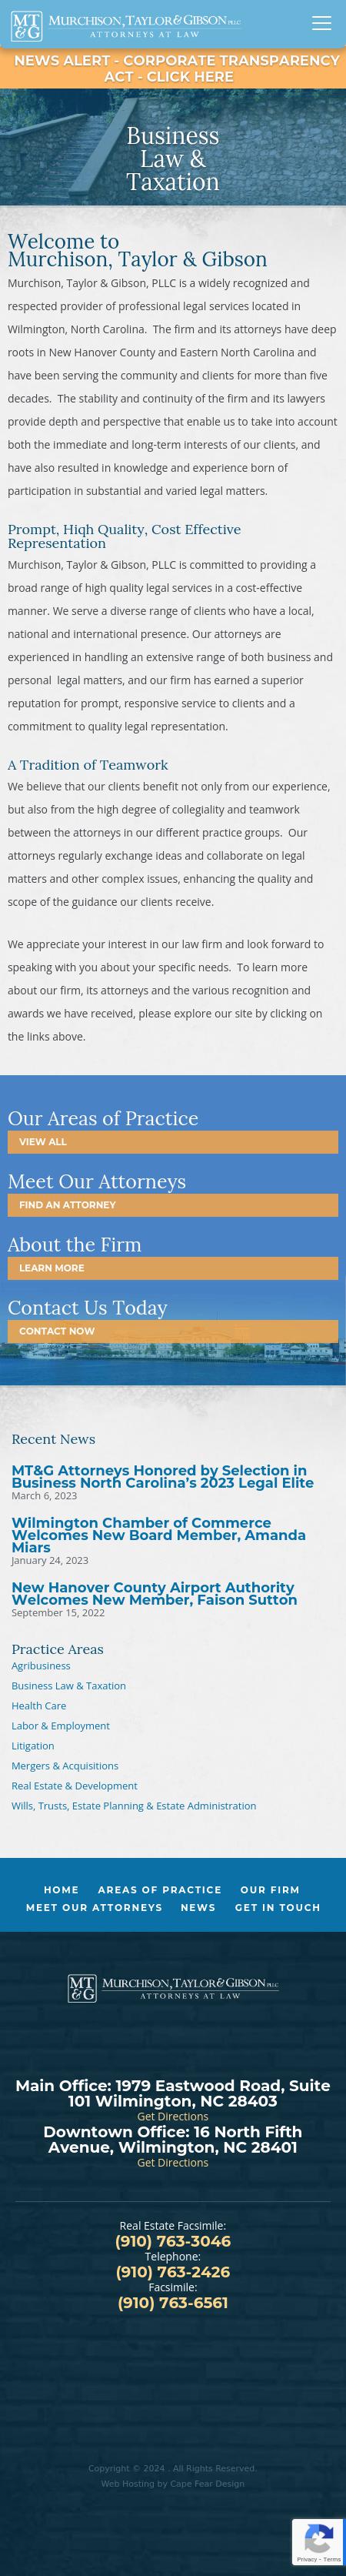 Murchison Taylor & Gibson PLLC - Wilmington NC Lawyers